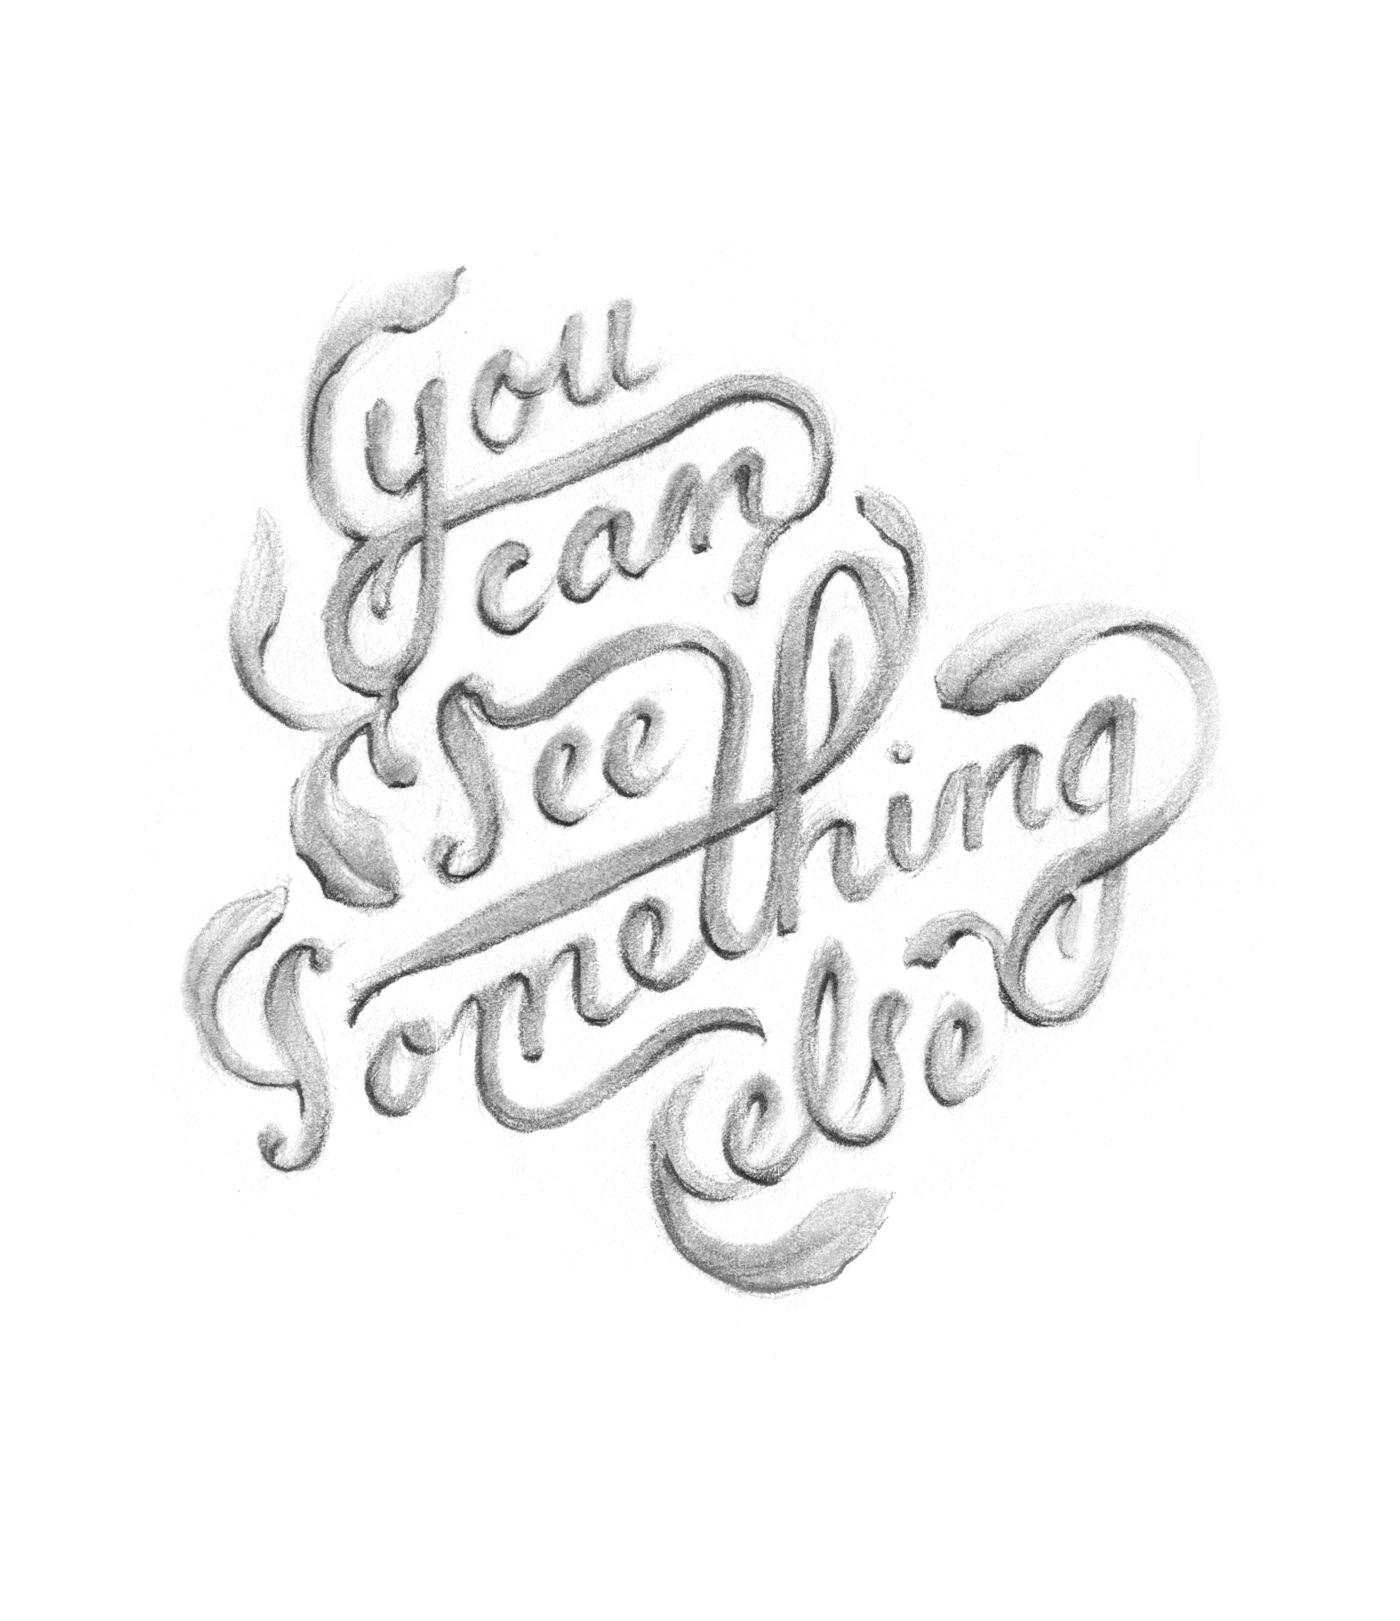 "You can see something else," illustrated lettering by Laura Dreyer. Lyrics by Sara Groves.